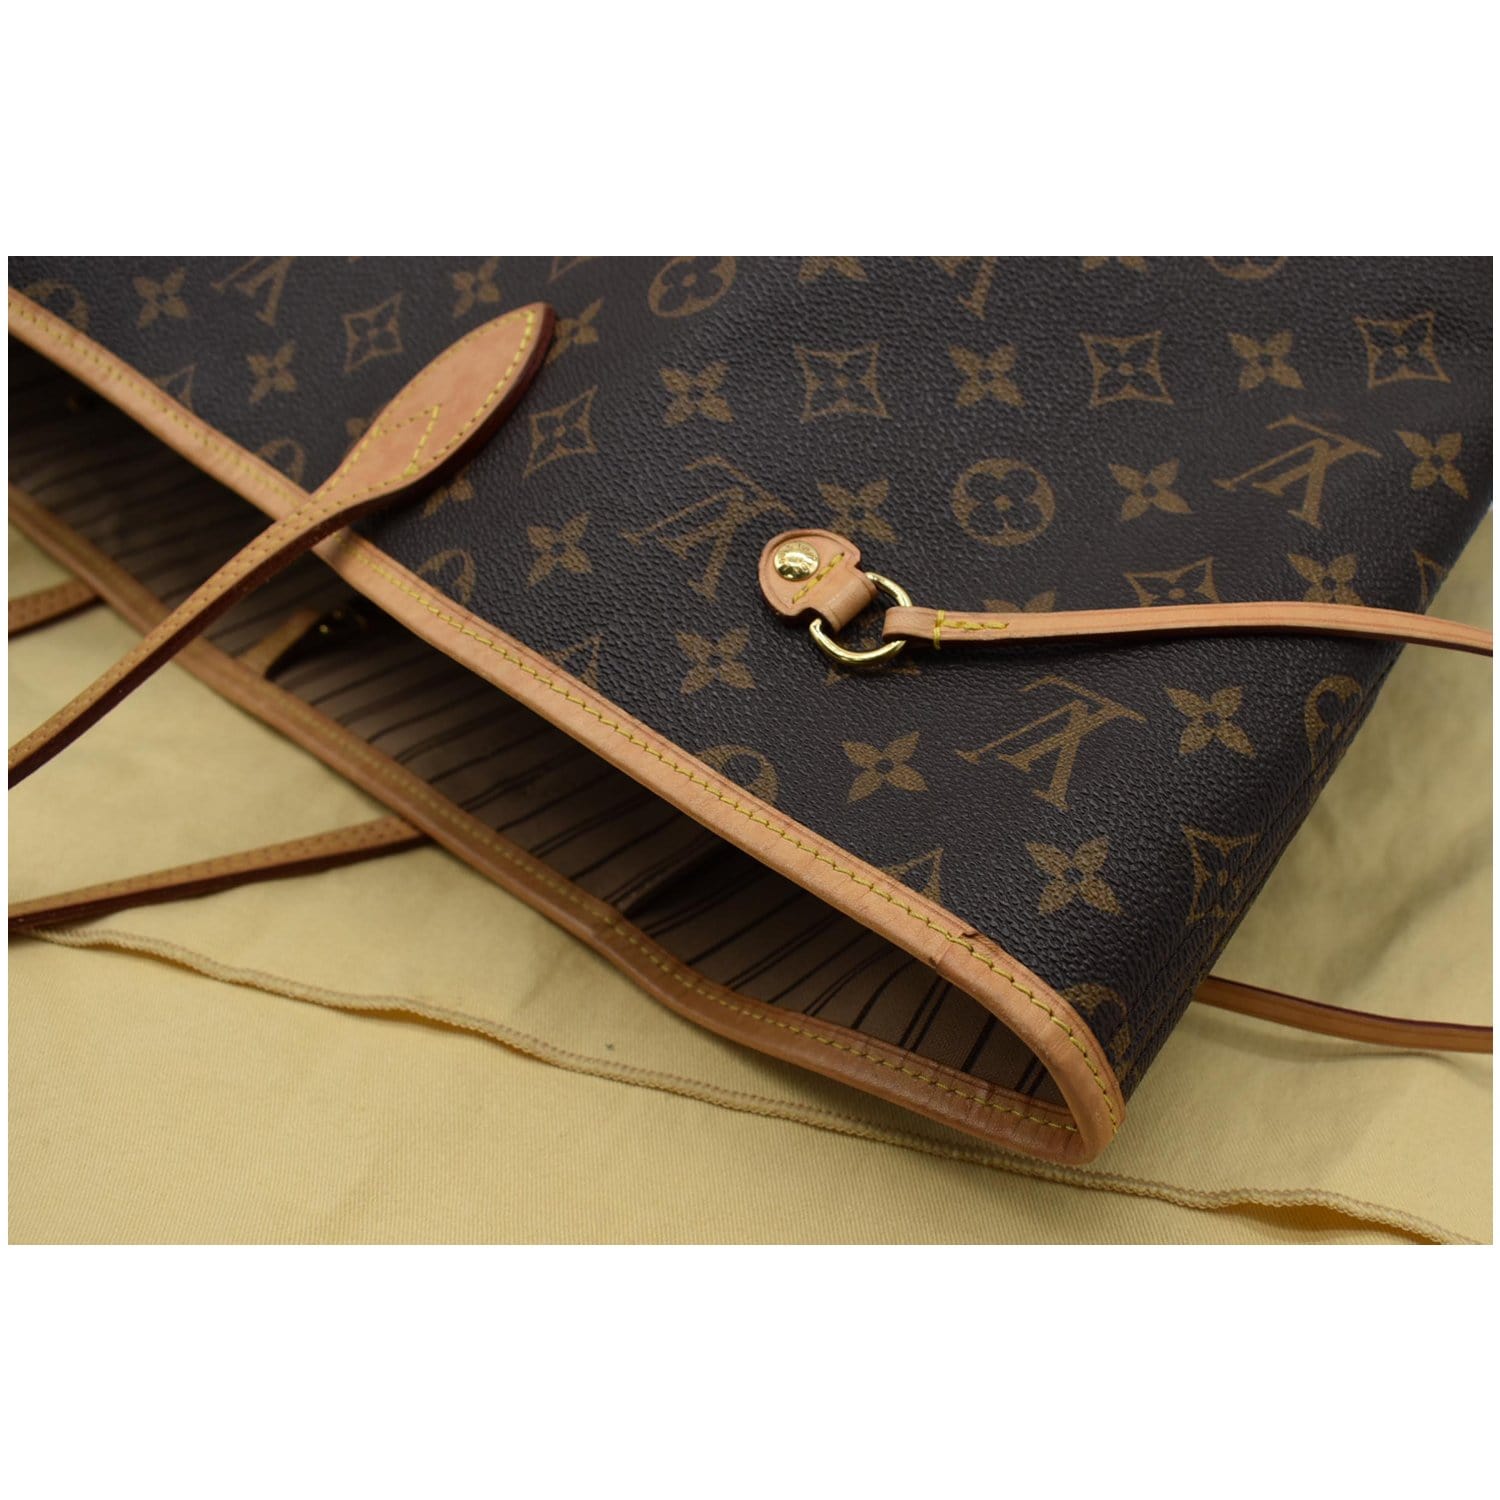 Authentic Louis Vuitton Neverfull GM monogram - Bags & Luggage